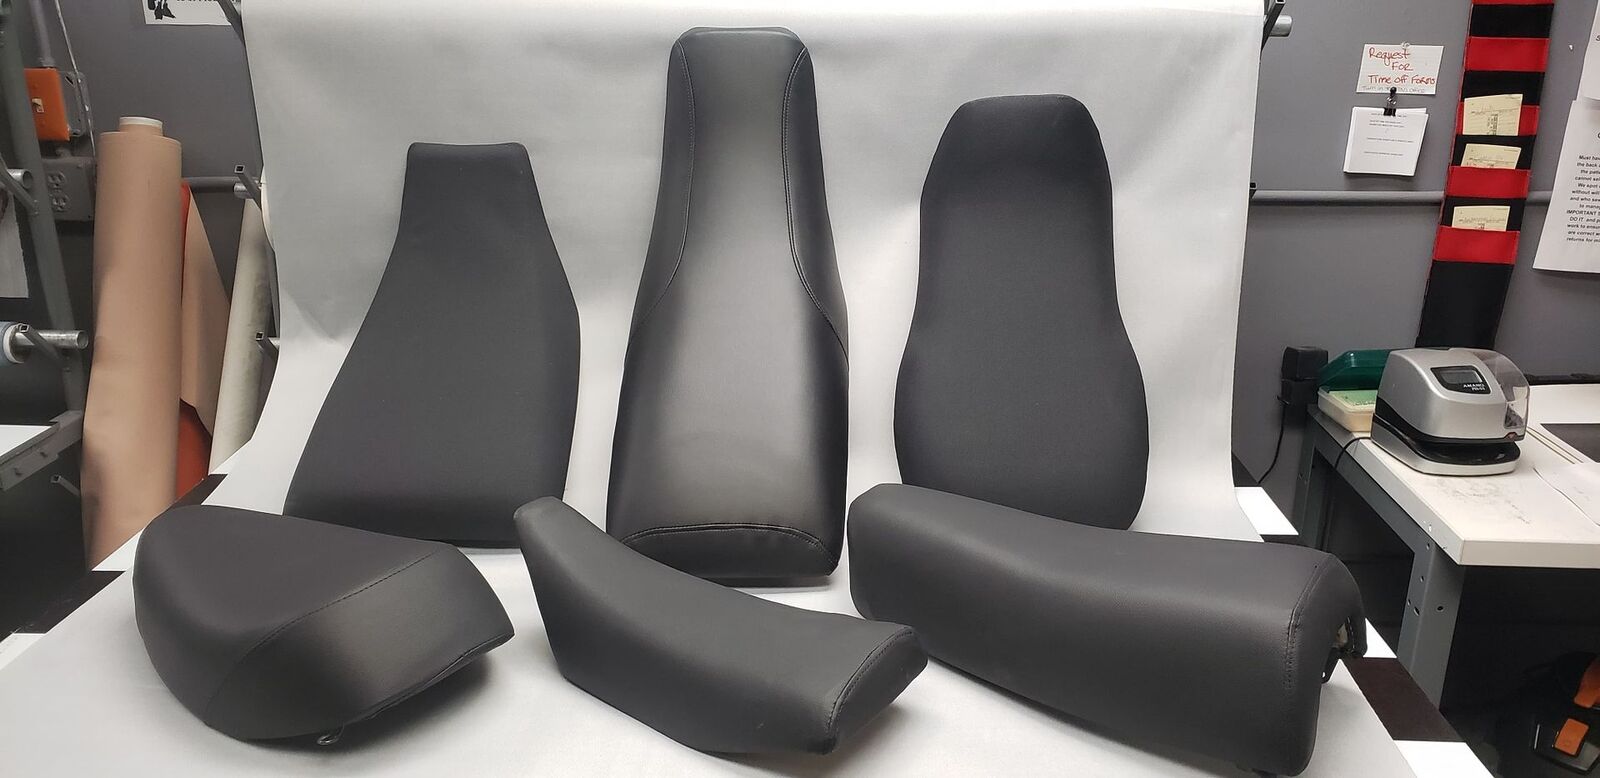 Honda GL 500 REAR Seat Cover For 1981 To 1982 Models